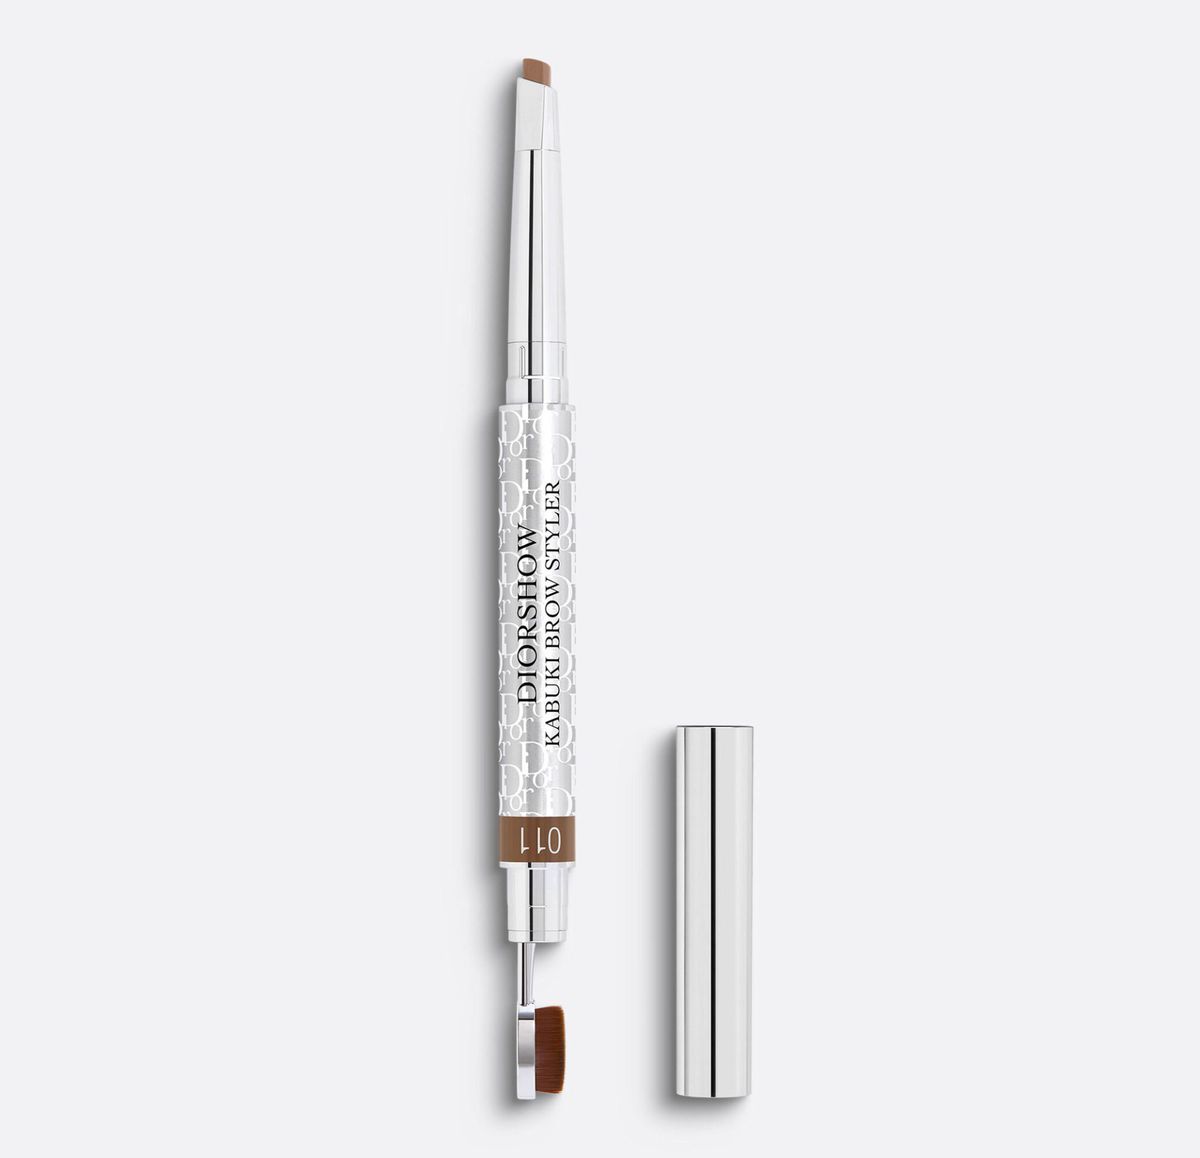 Diorshow Kabuki Brow Styler dual-ended eye brow pencil with spoolie.